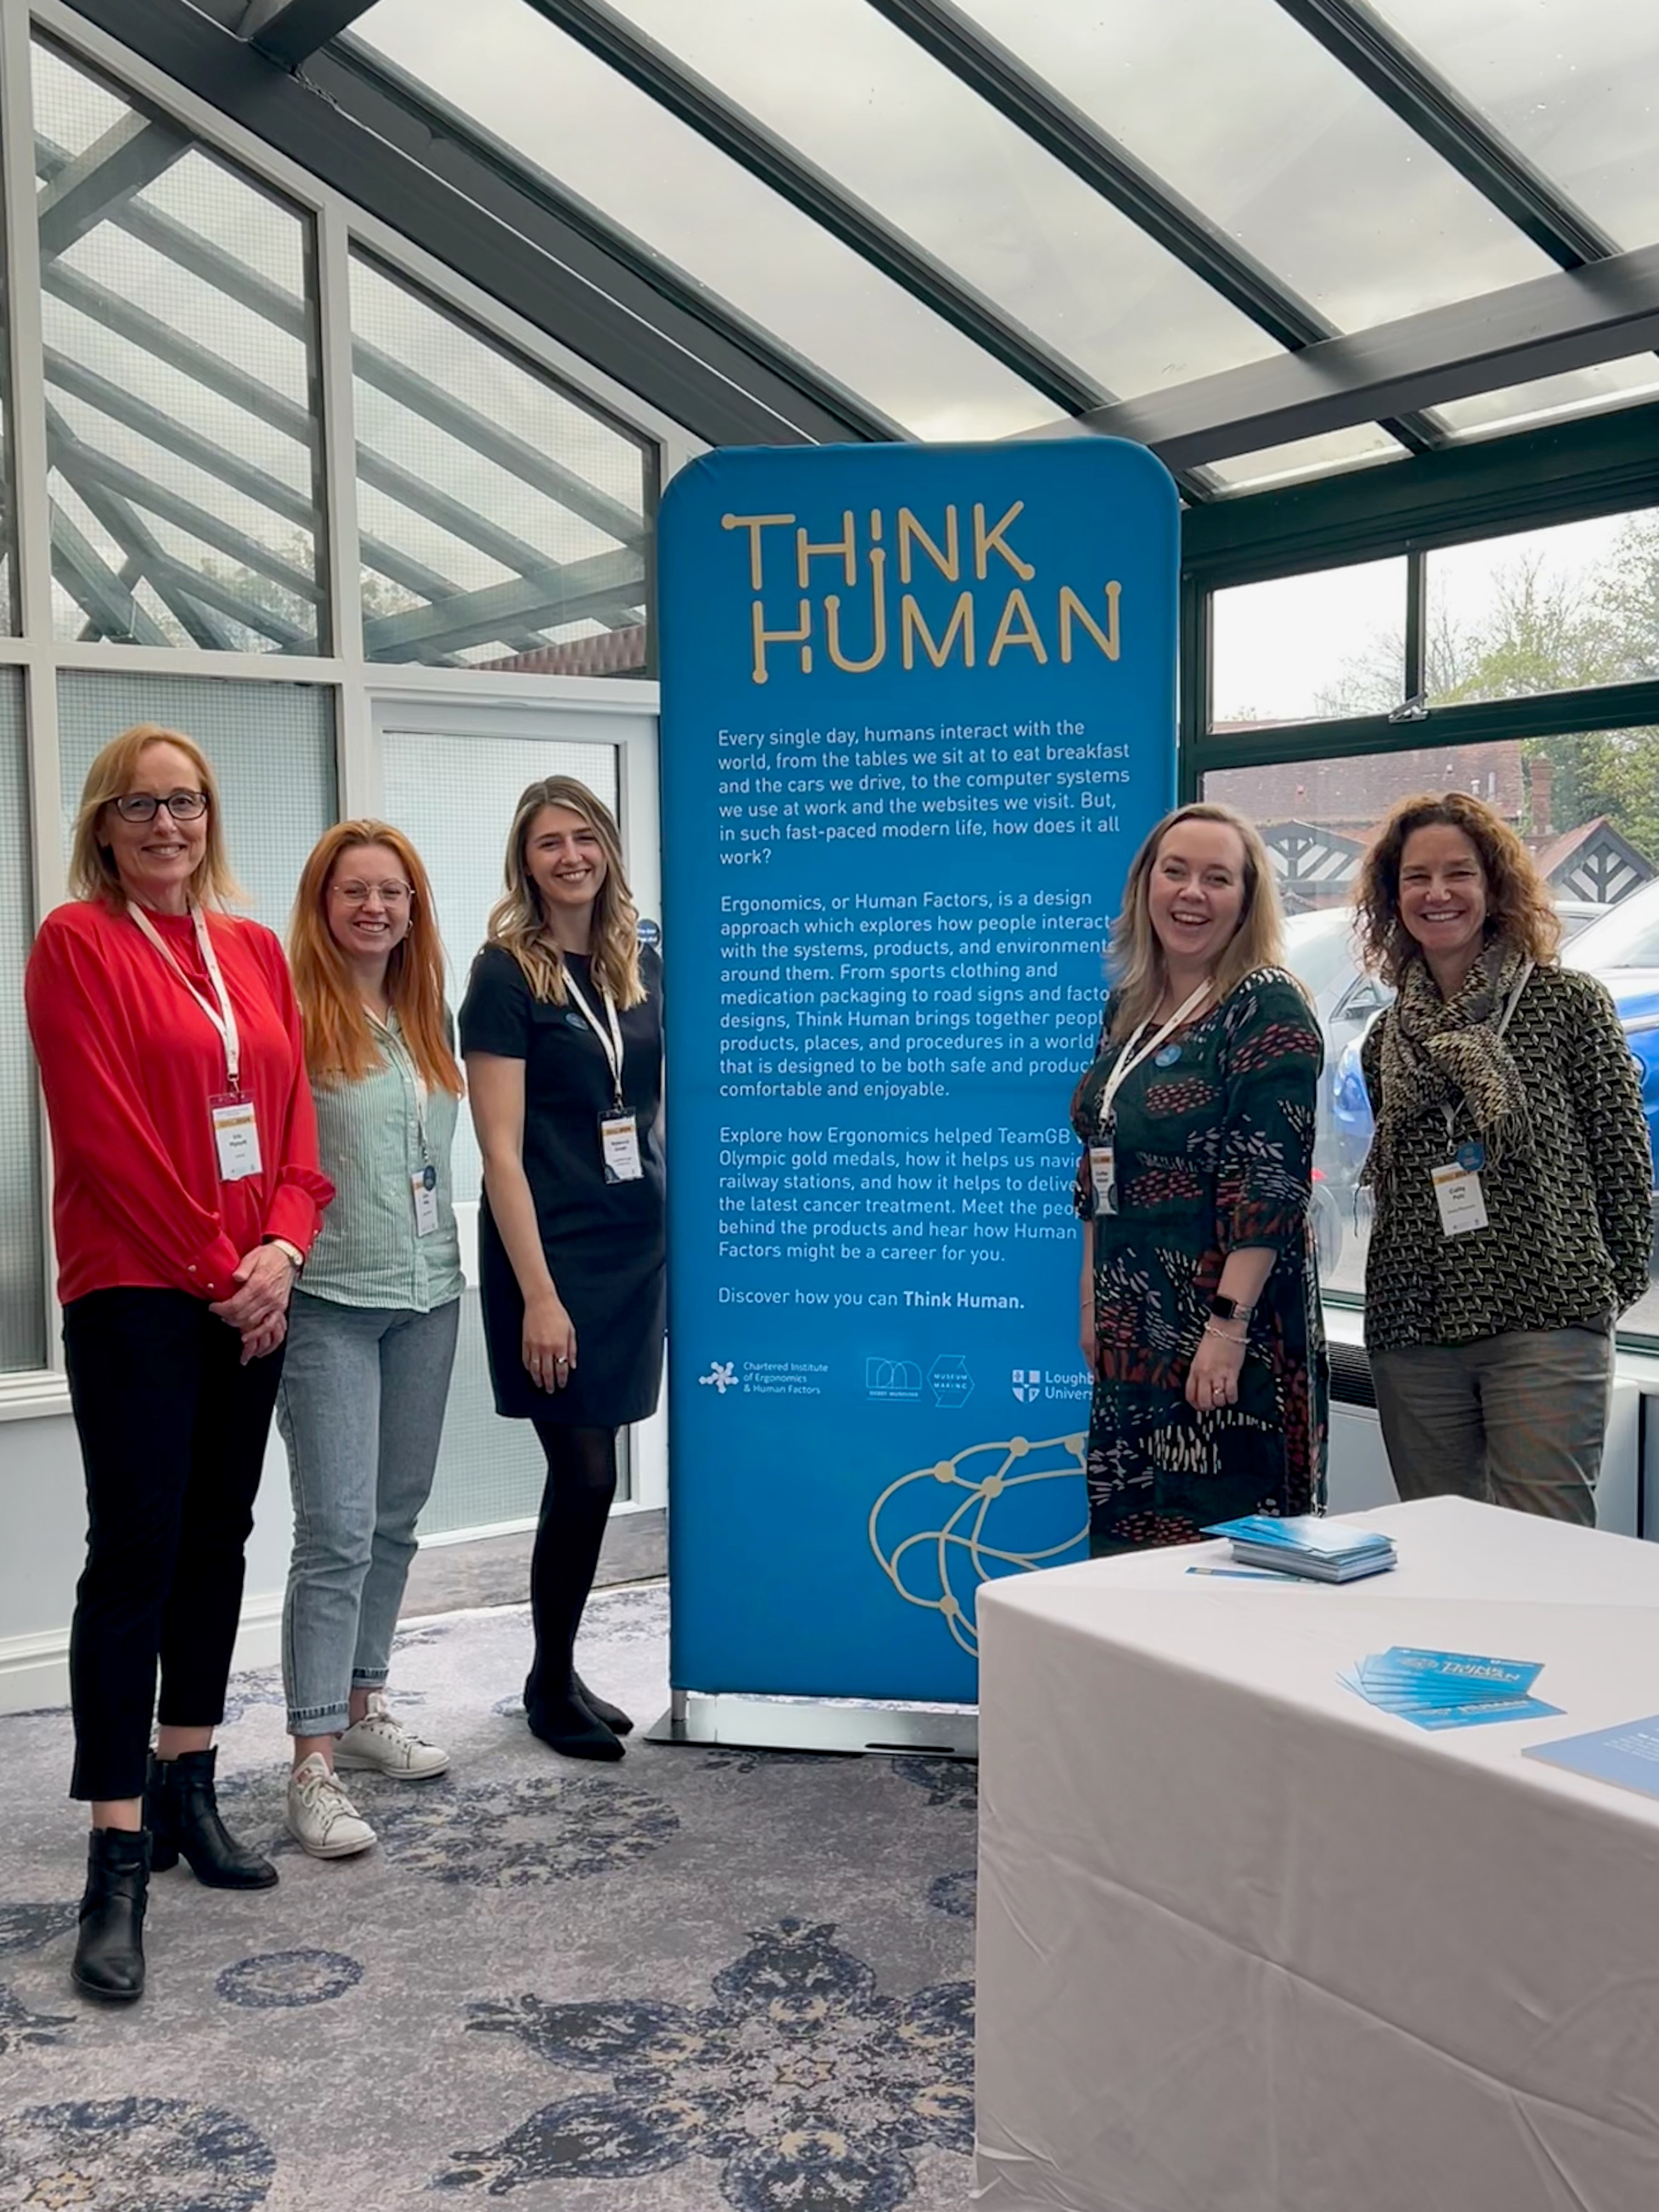 Picture showing team in front of Think Human roller banner